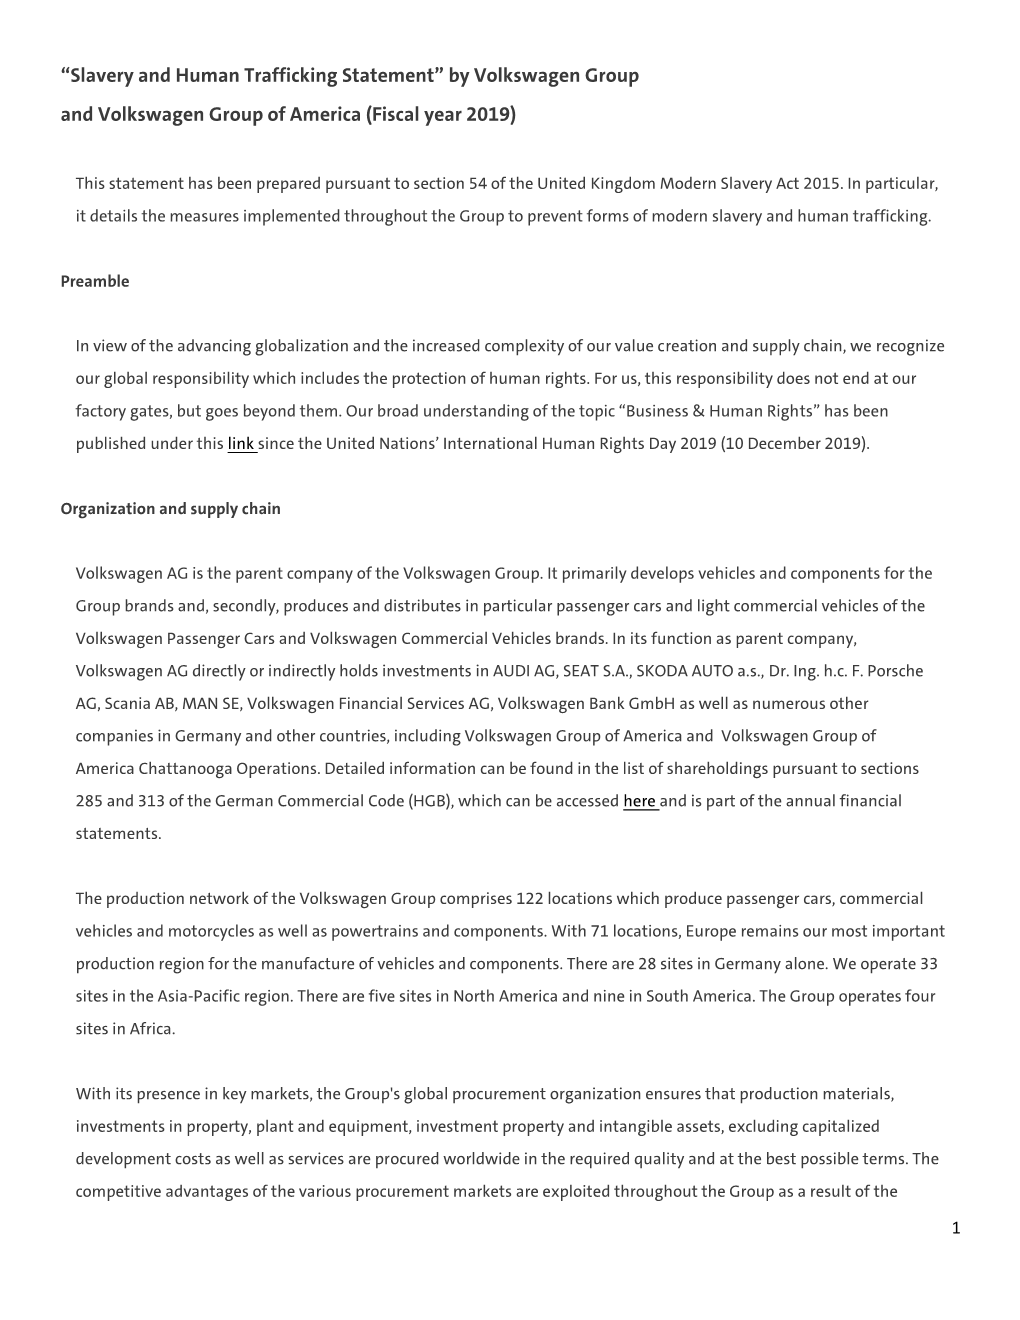 “Slavery and Human Trafficking Statement” by Volkswagen Group and Volkswagen Group of America (Fiscal Year 2019)